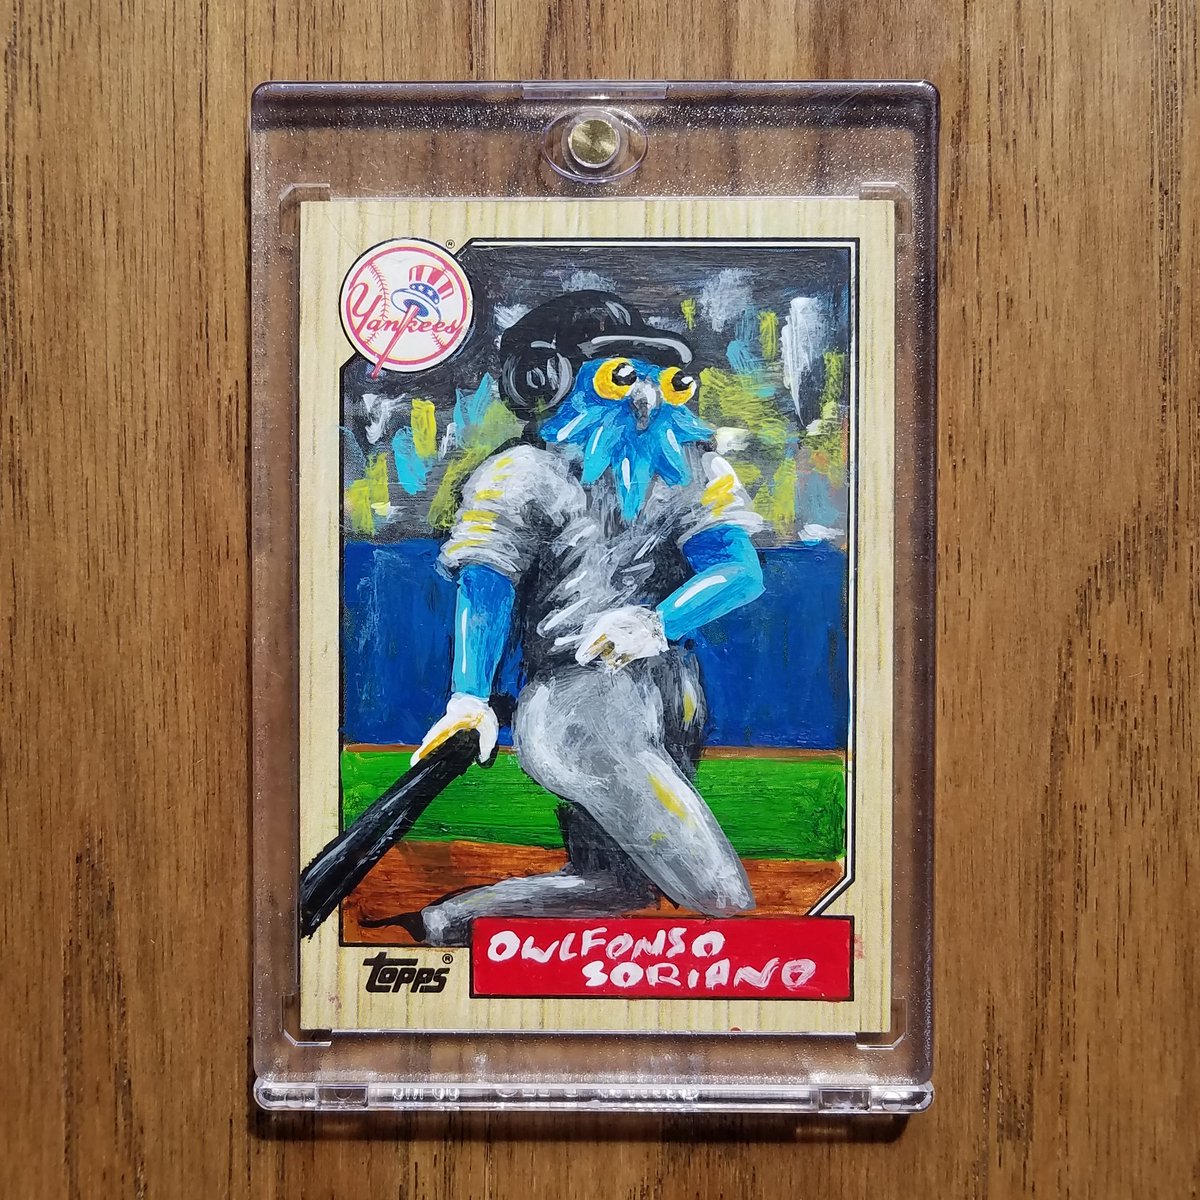 mlb opening day is here! my squad is ready. how bout yours? have some fresh, hand painted, custom junk wax art cards depicting your favorite owl in baseball gear. check it out. each one is unique.